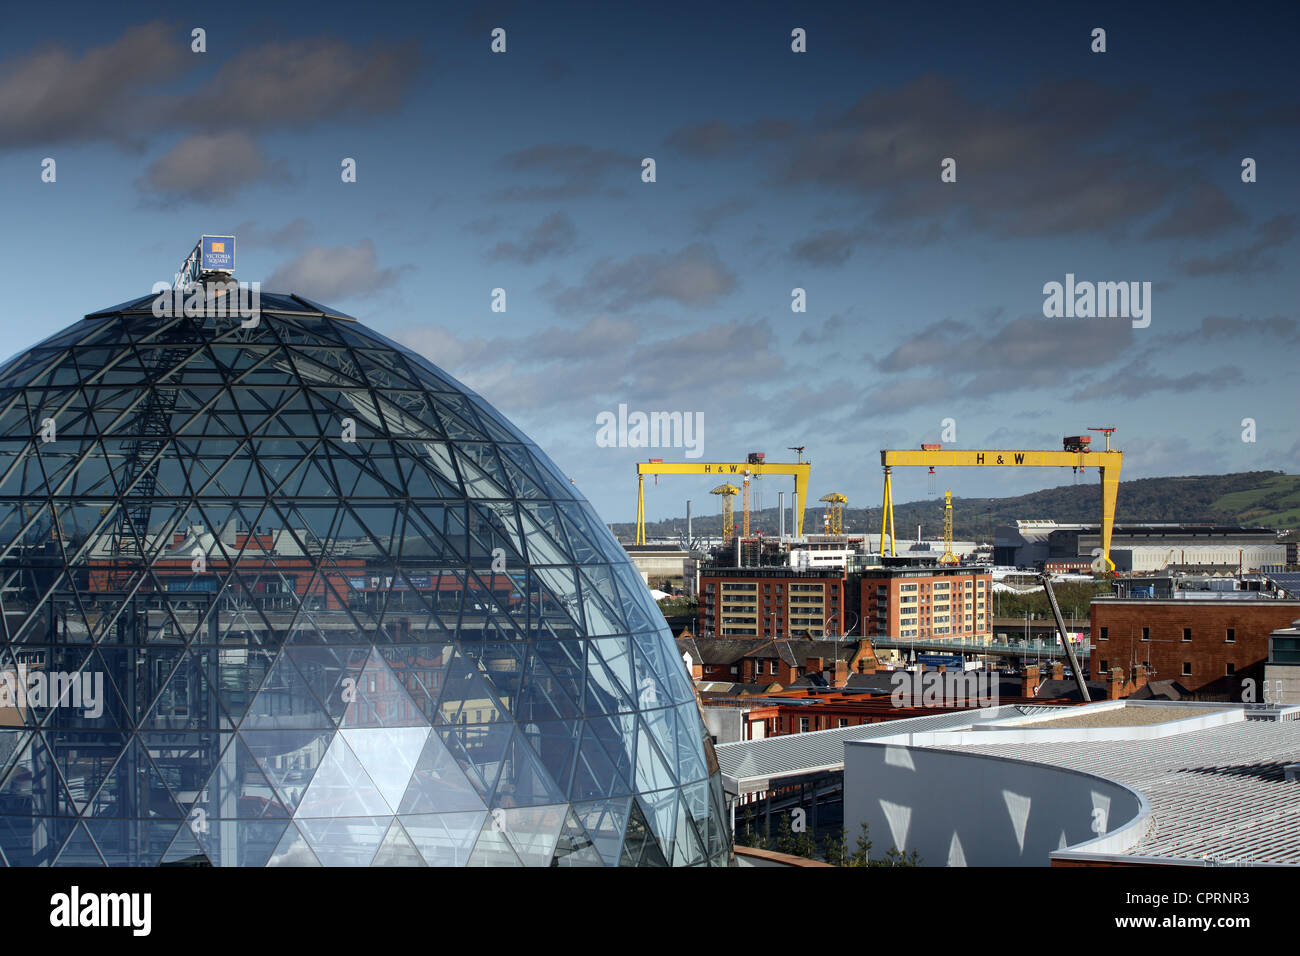 View of Victoria Square Dome with Harland and Wolff Cranes in Background Stock Photo